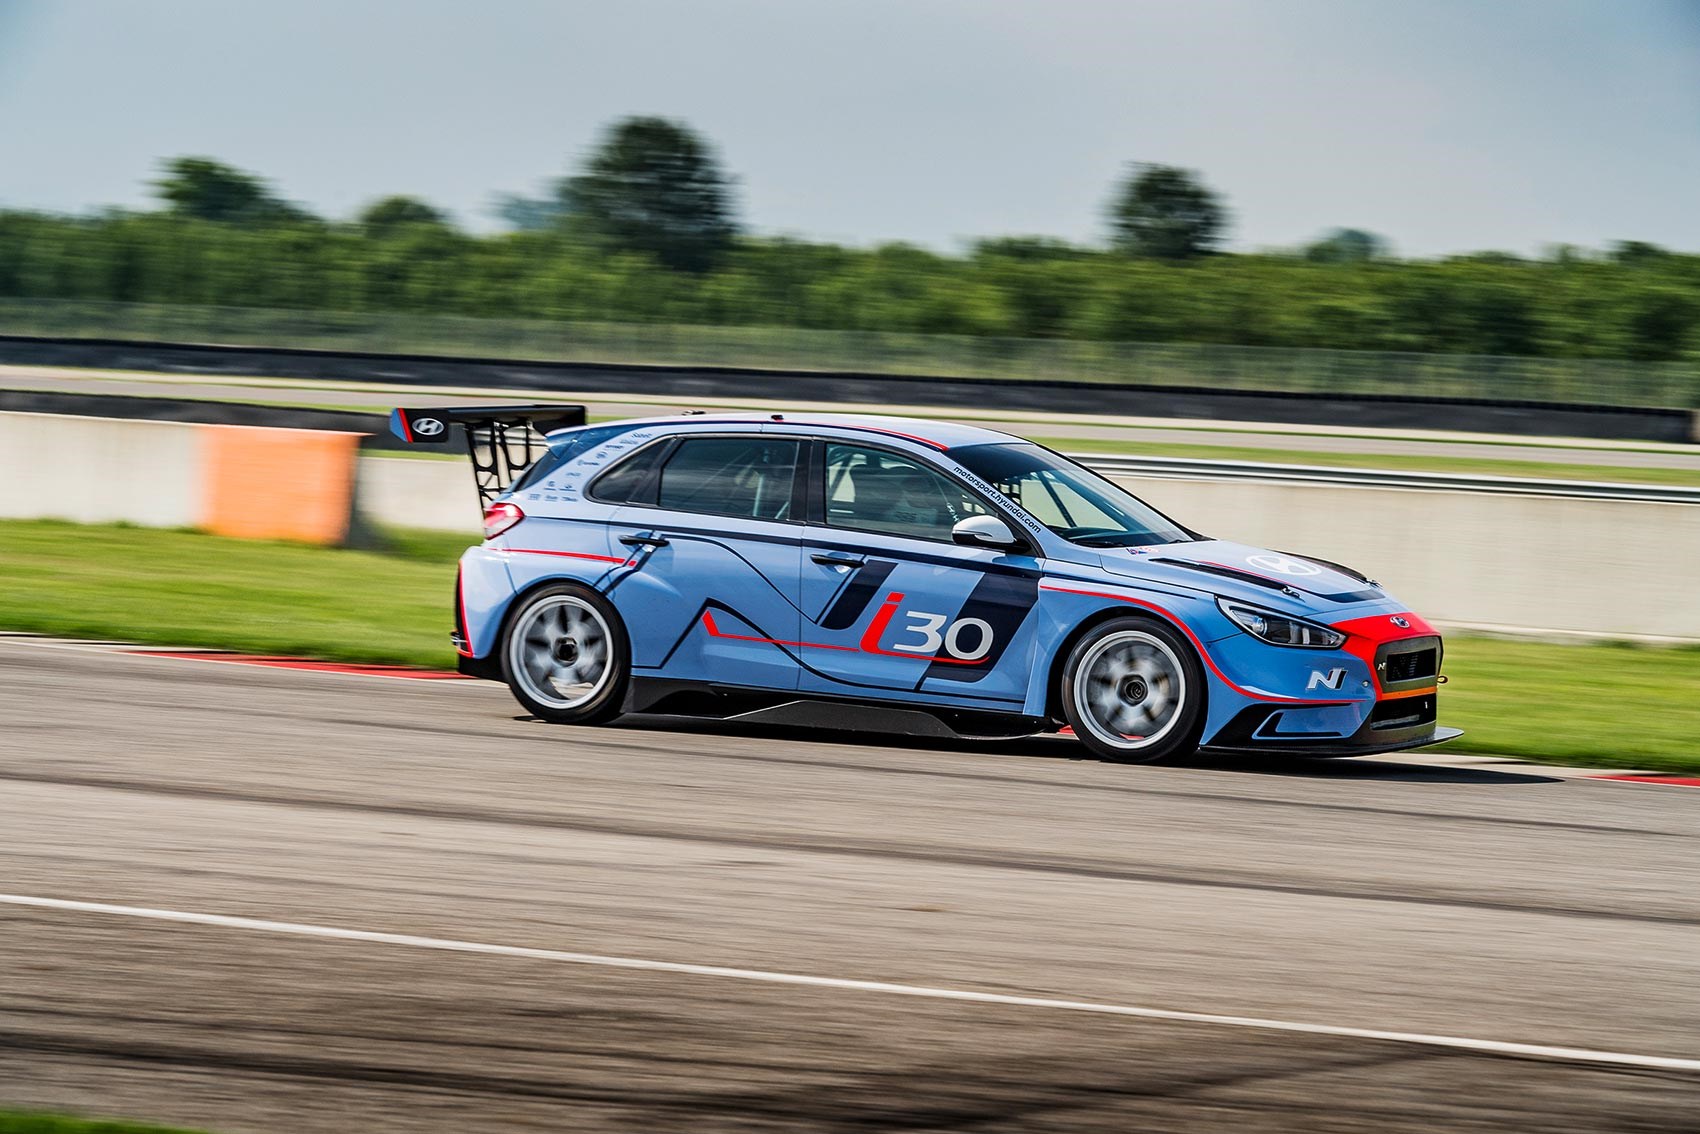 This is the newly paddleshifted Hyundai i30N